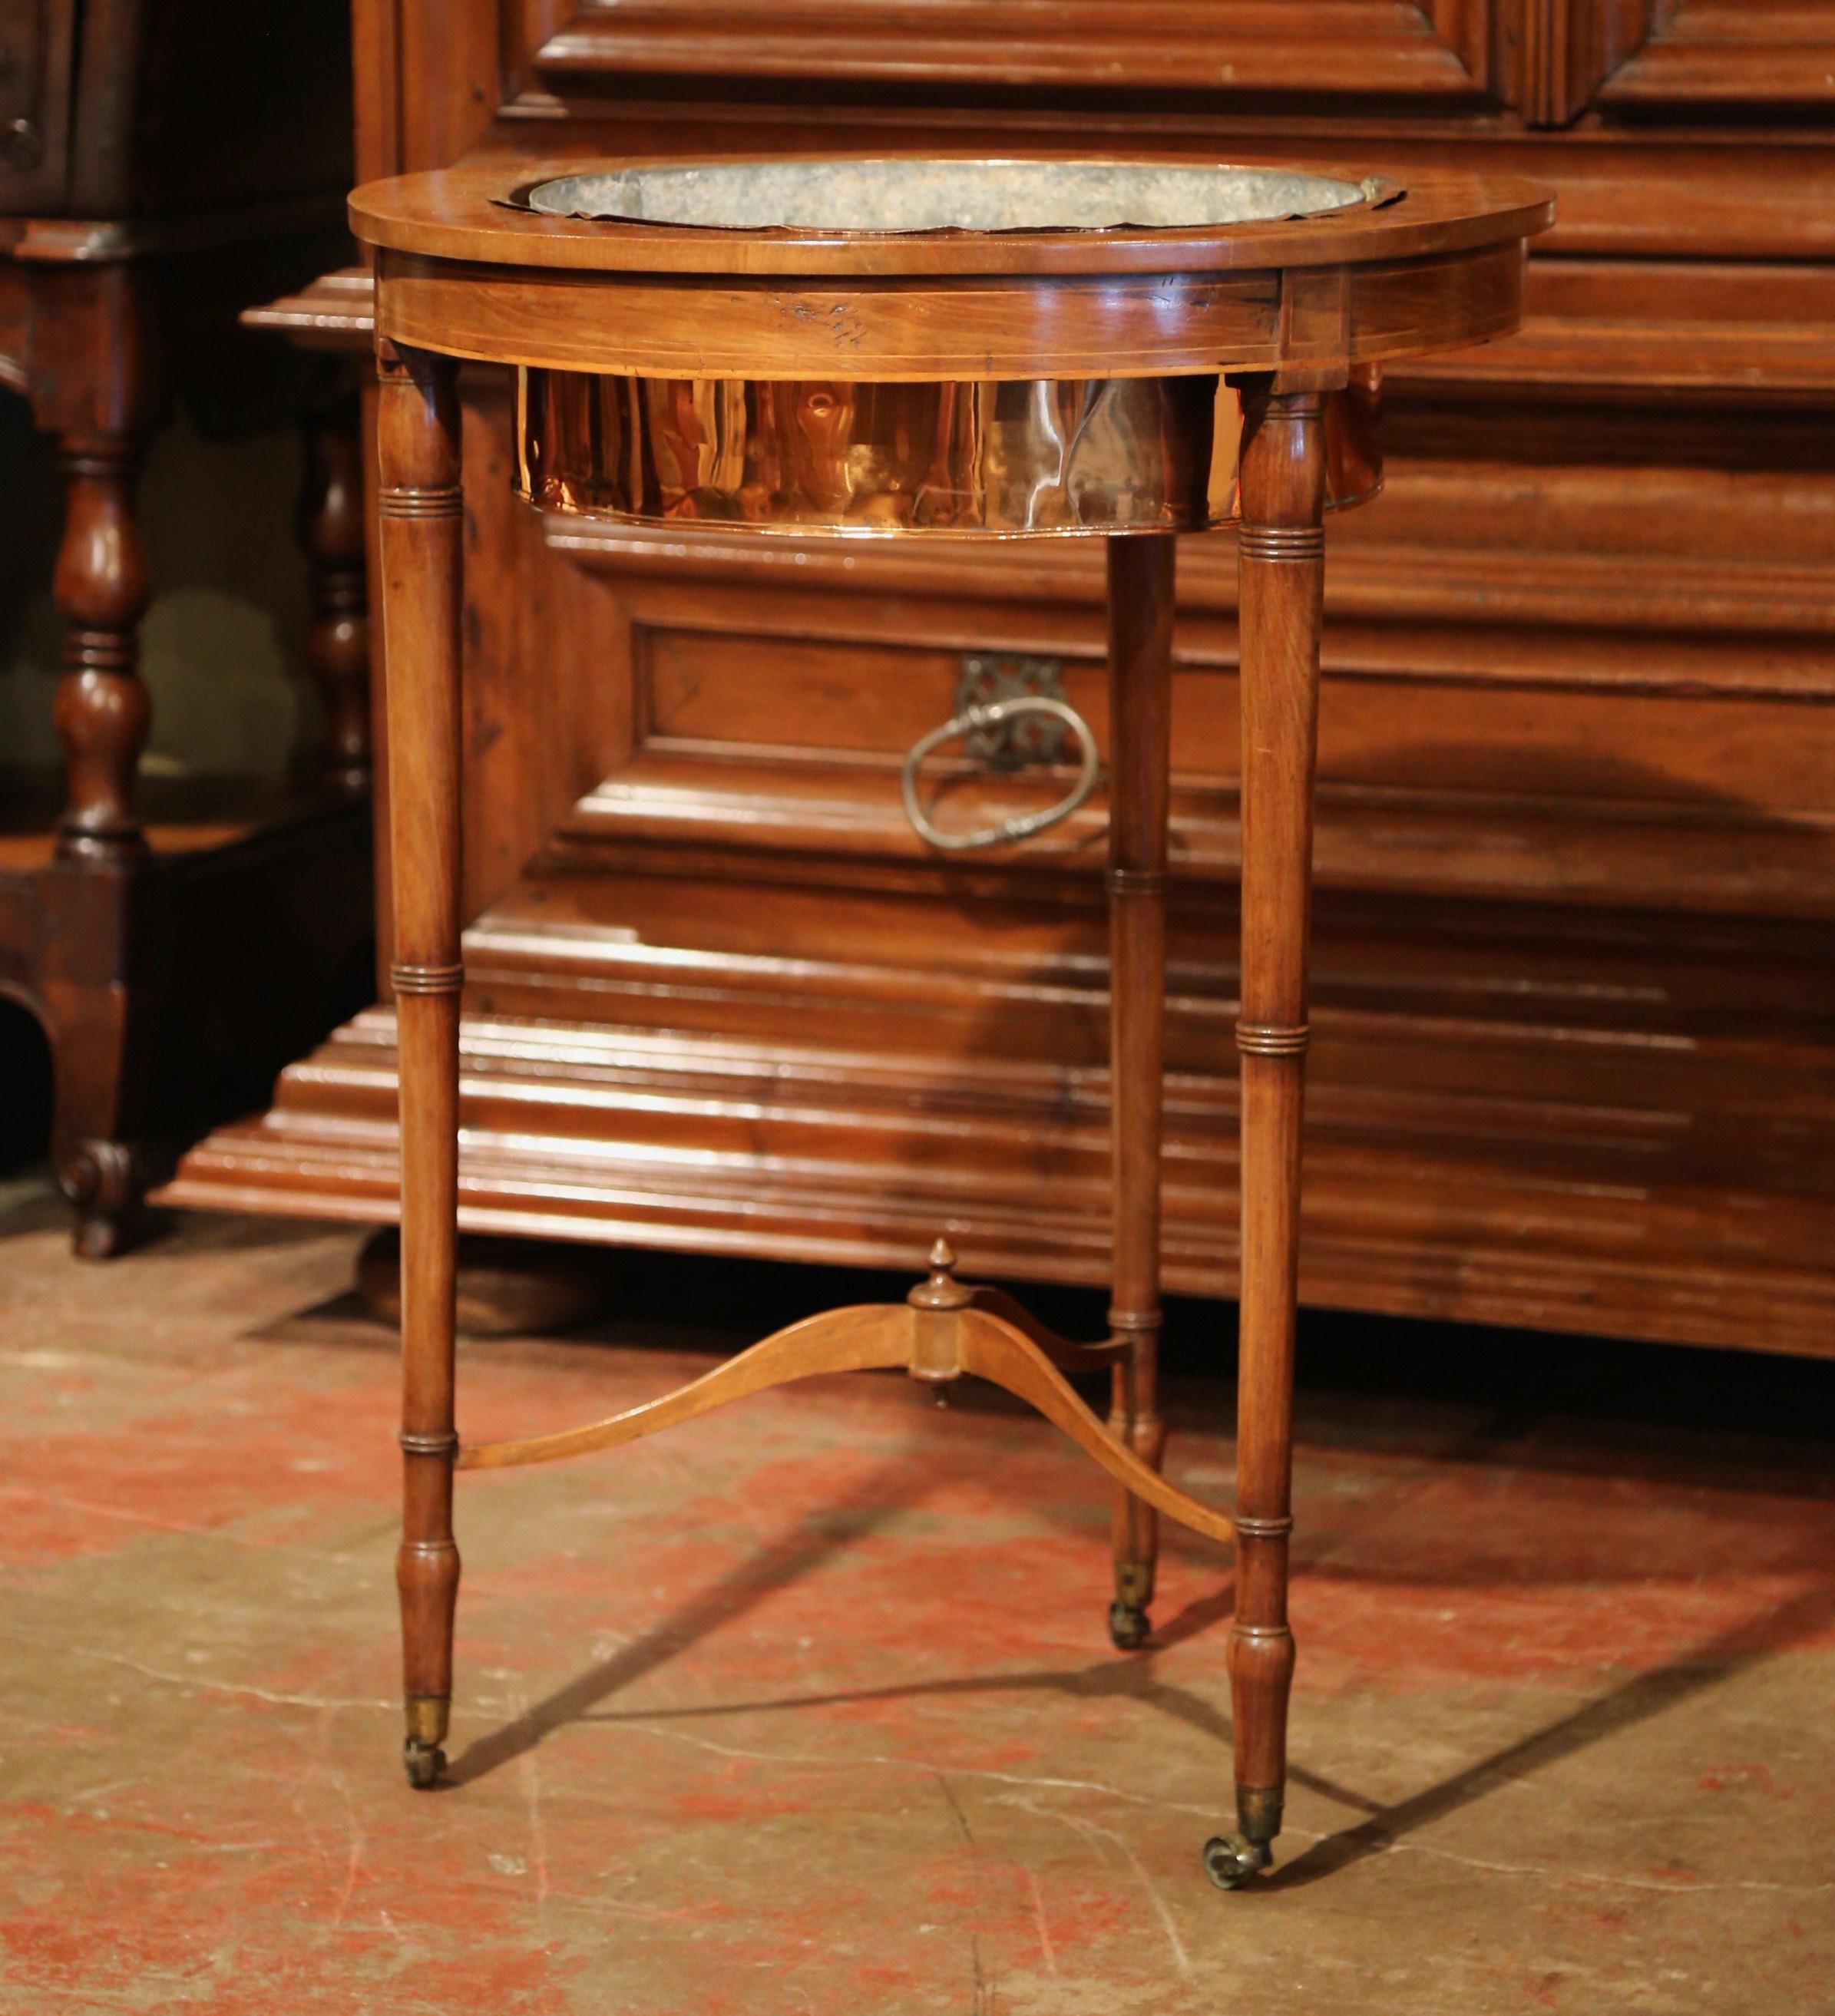 This traditional planter was crafted in England, circa 1880. Round in shape, the plant stand sits on three turned legs with brass wheels and a bottom stretcher embellished by a carved central finial. The plant stand has a removable zinc liner inside